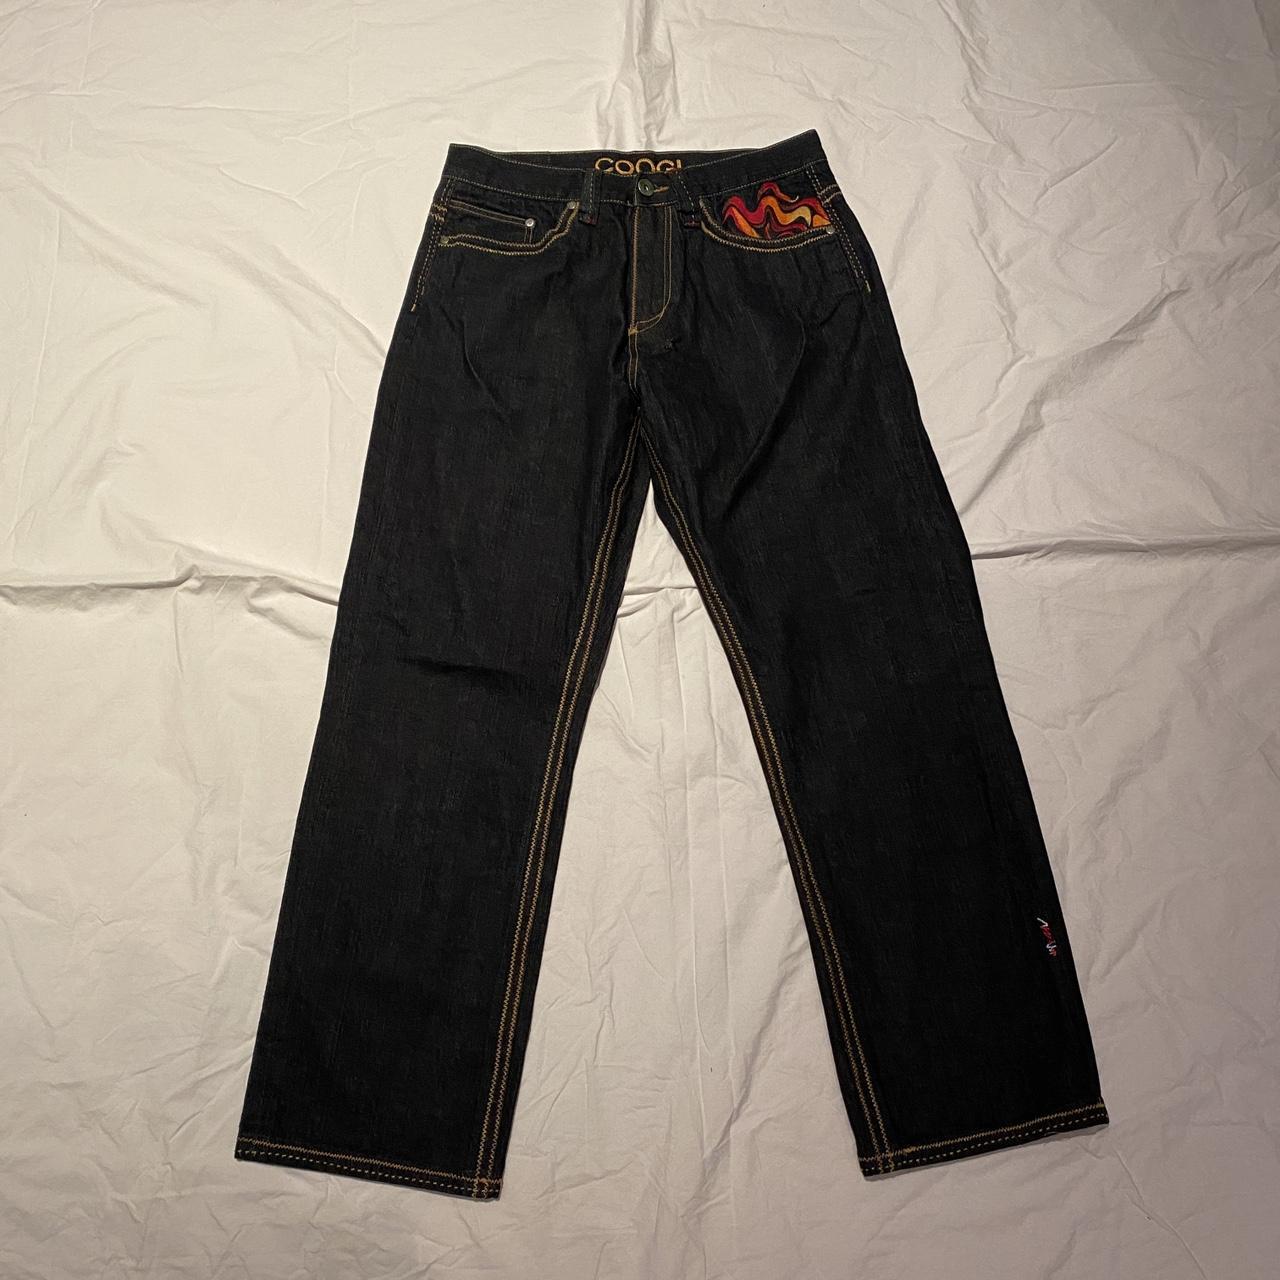 Coogi Men's Navy and Red Jeans (2)